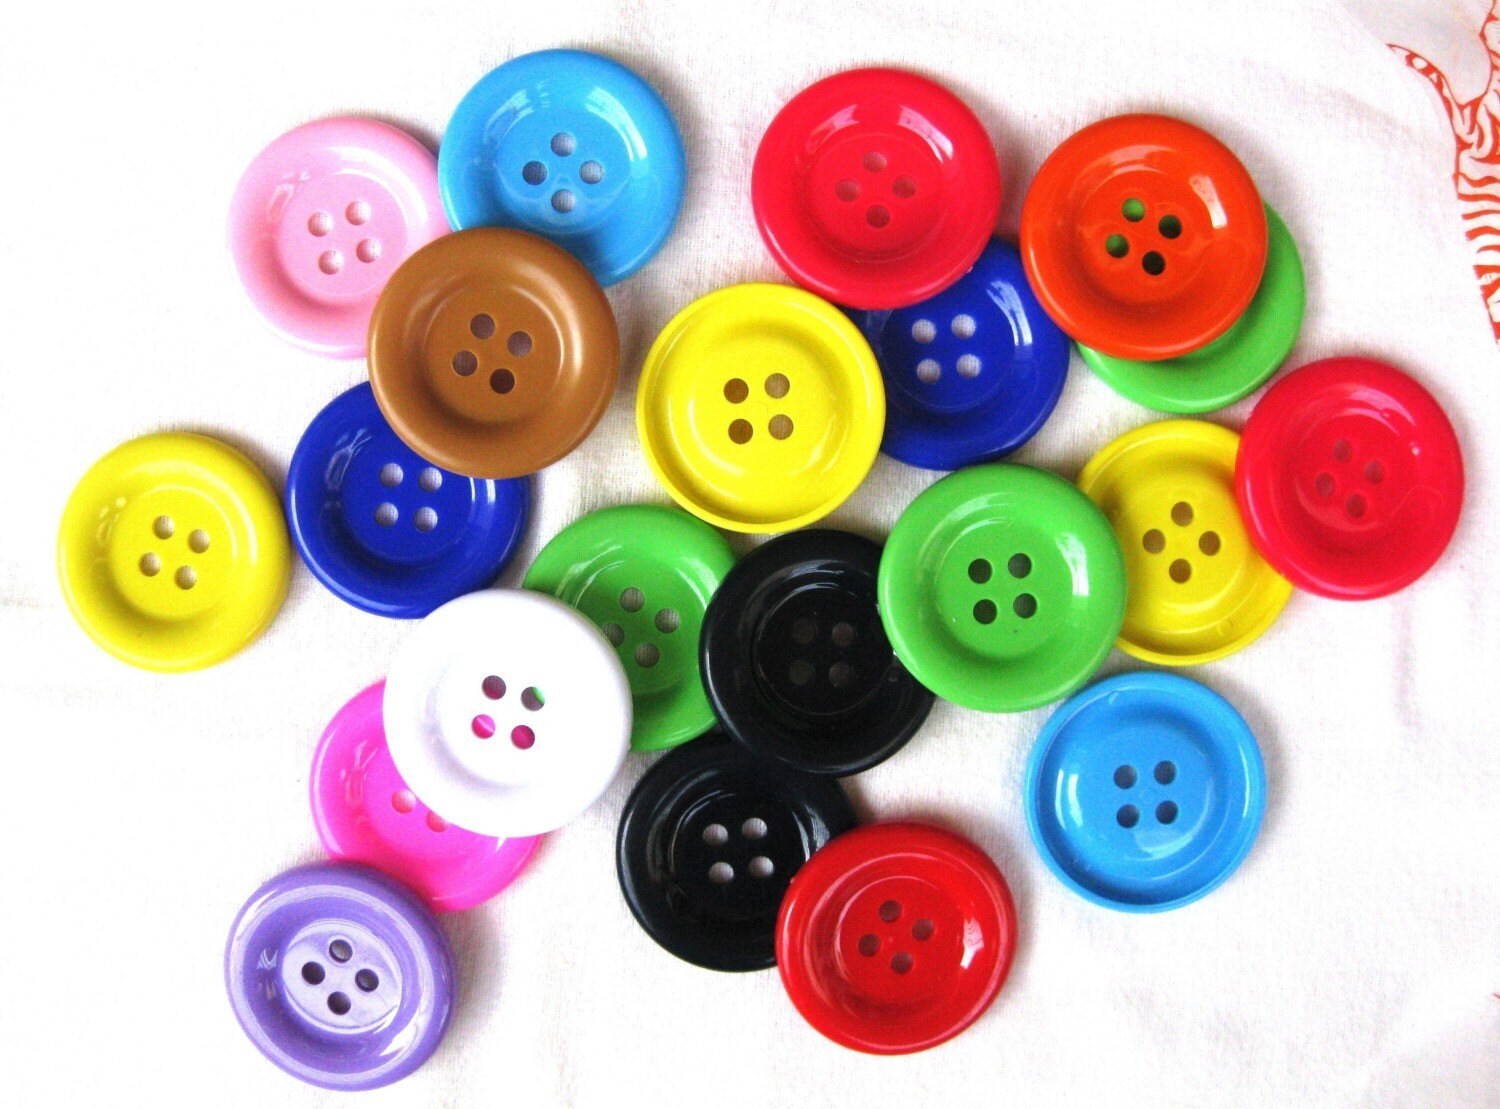 buttons on bags